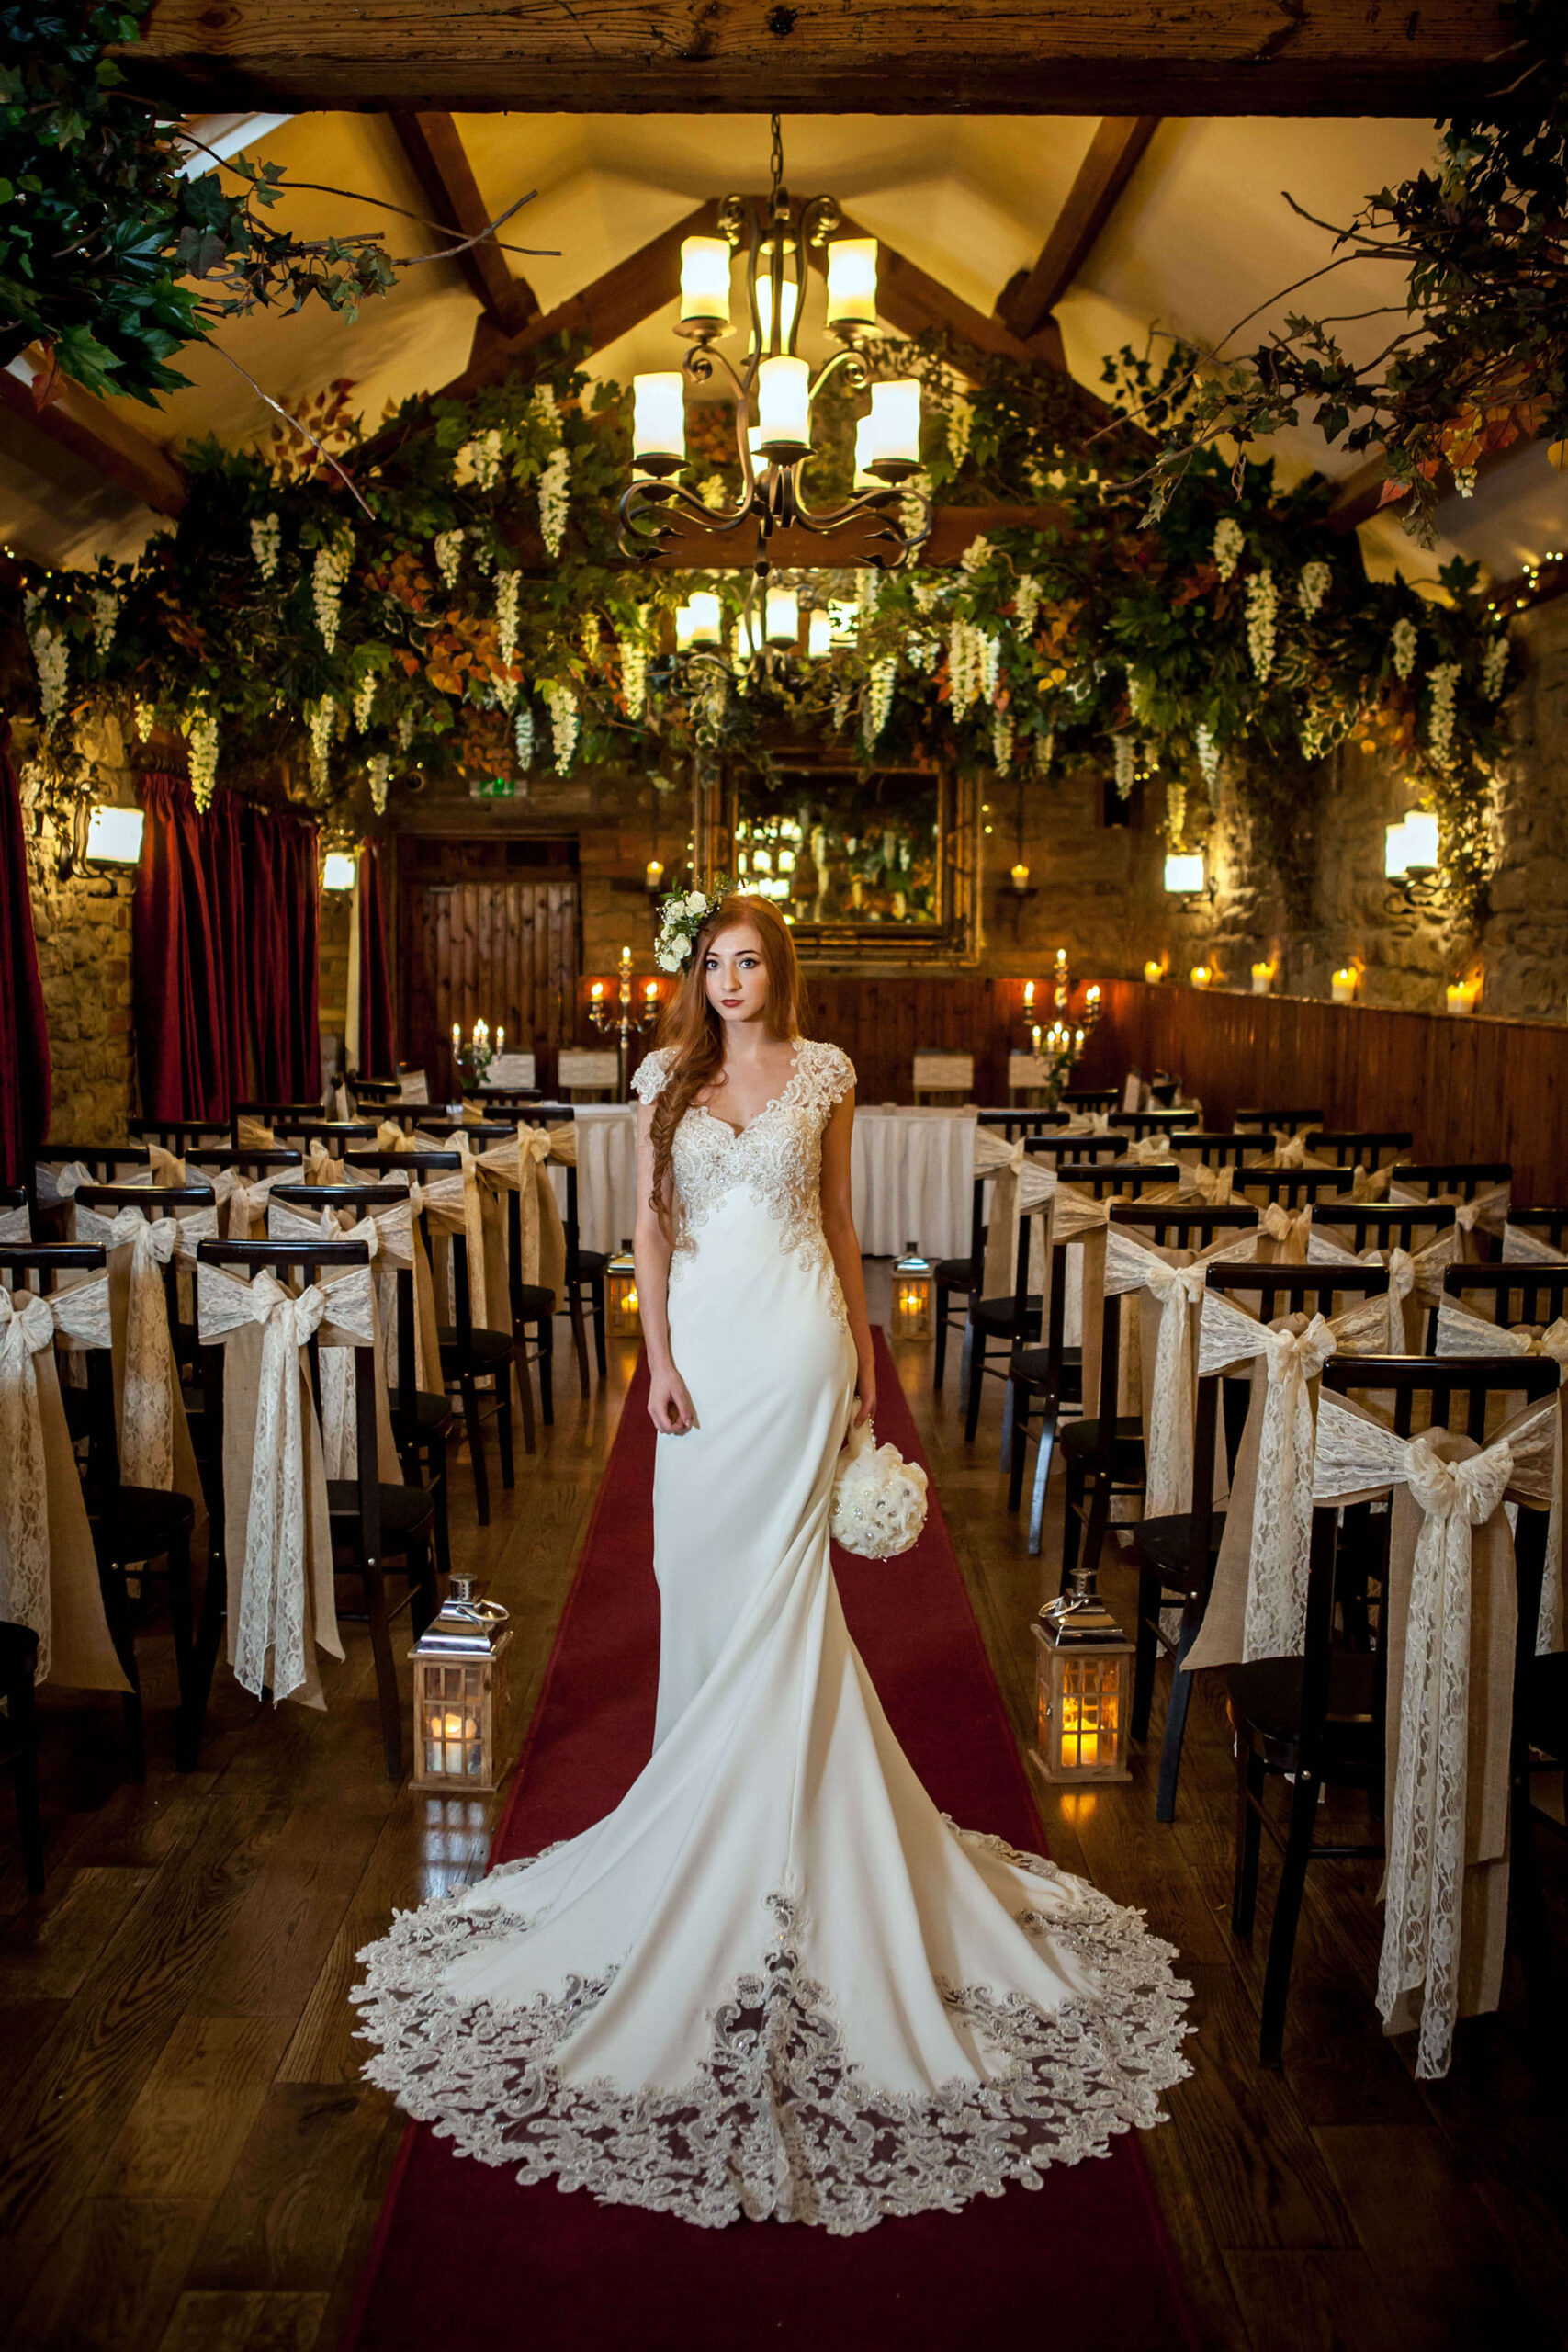 Bridal portrait with a long wedding dress in a luxury venue with magical lighting, by Erika Tanith Photography